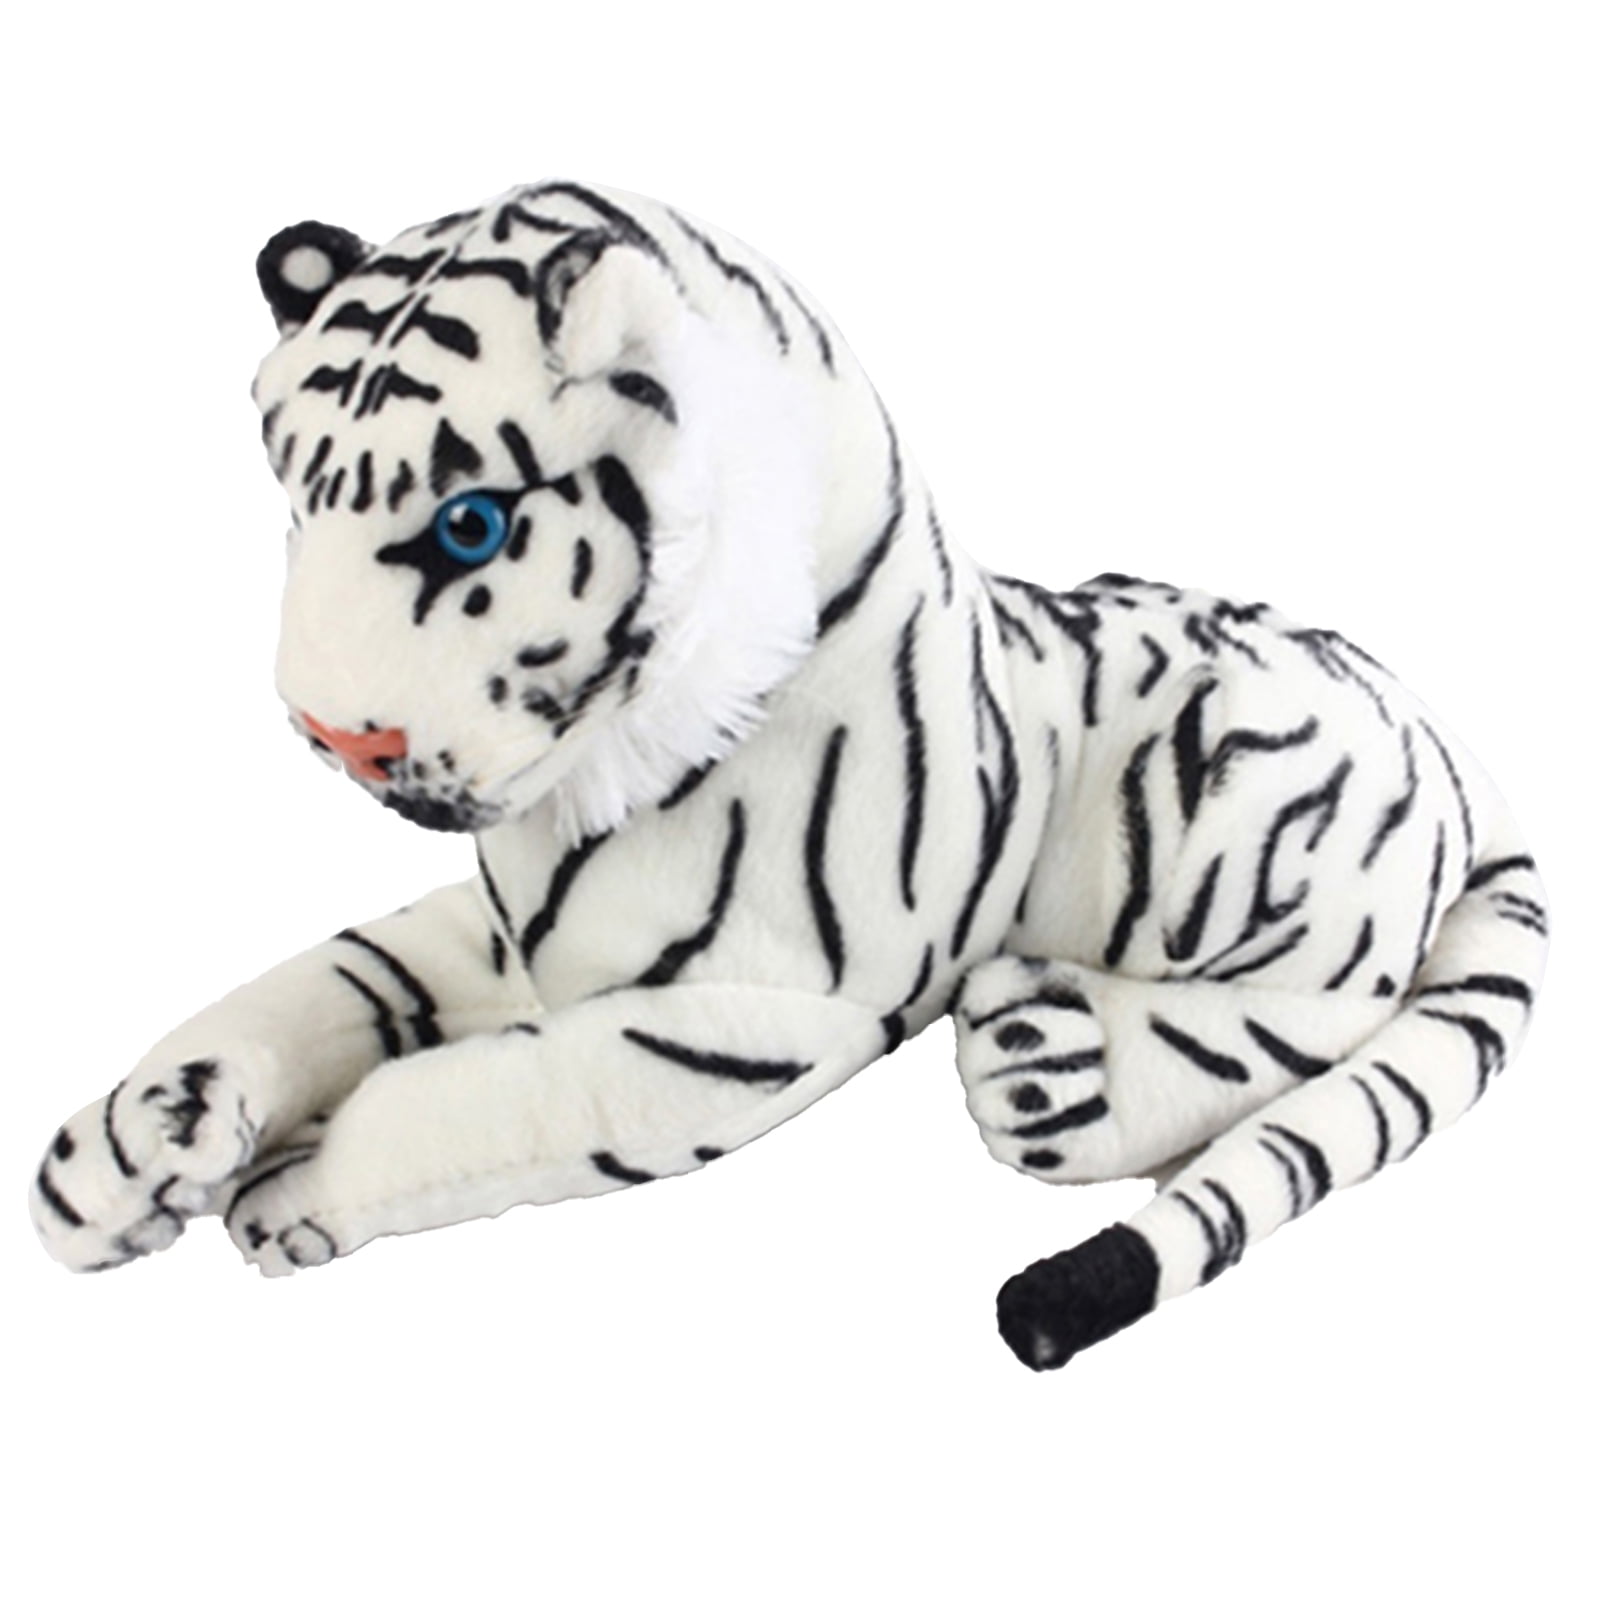 Sinovia the Snow Leopard17 Inch Stuffed Animal PlushBy Tiger Tale Toys 